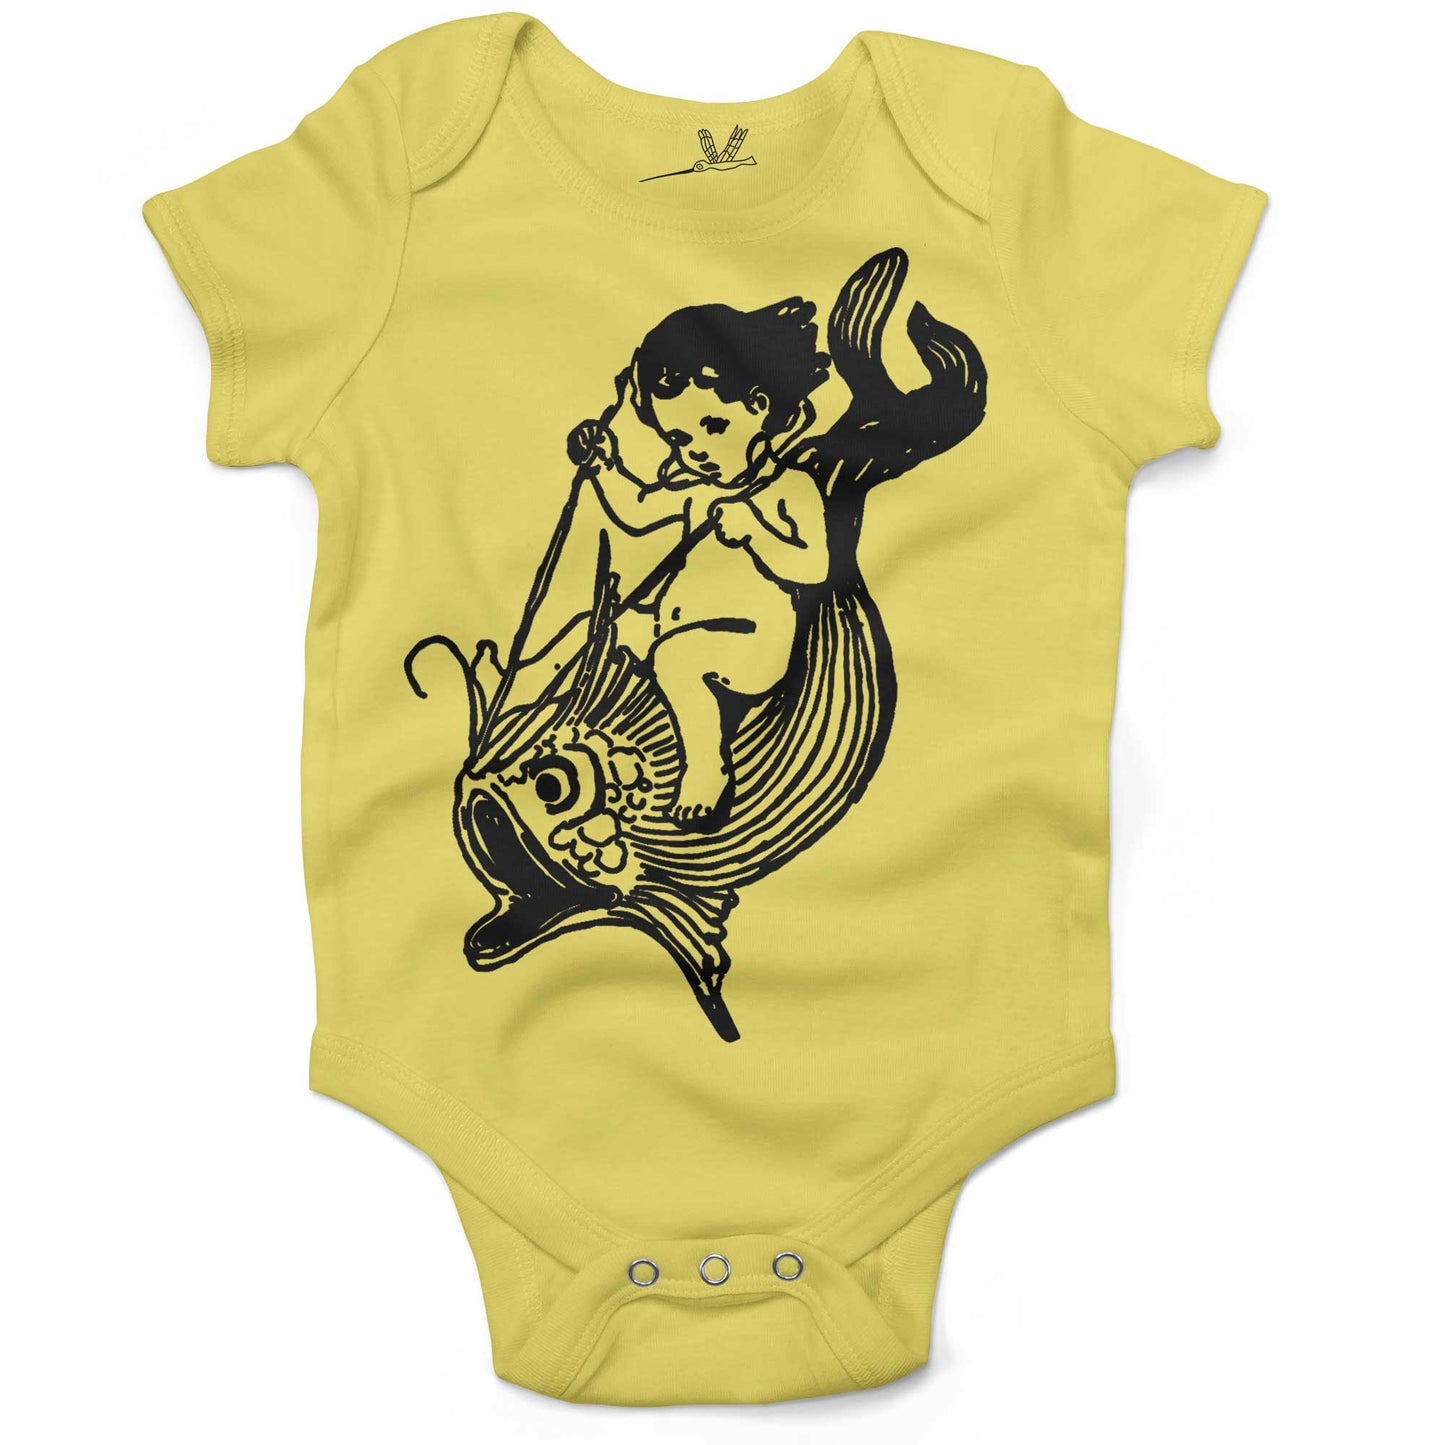 Water Baby Riding A Giant Fish Infant Bodysuit or Raglan Tee-Yellow-3-6 months